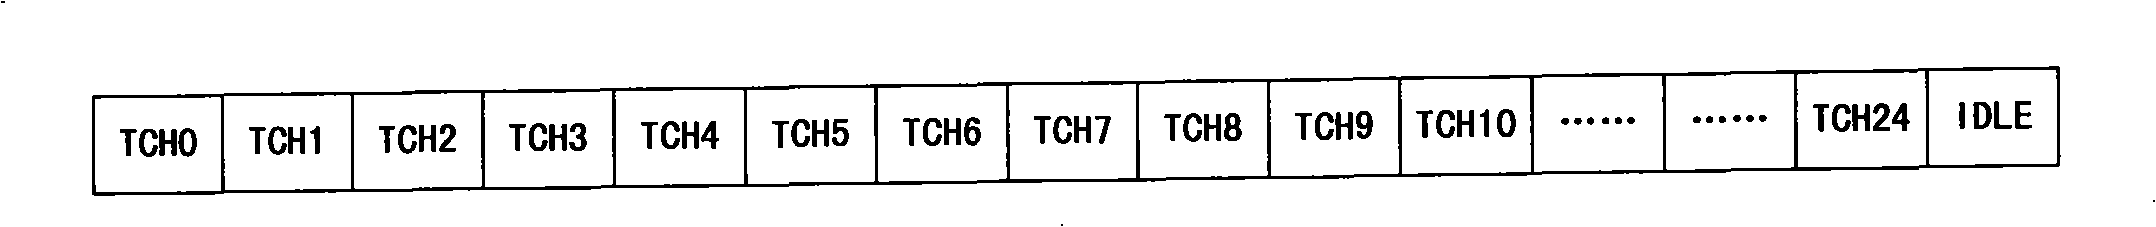 Method for measuring TD-SCDMA network by GSM/TD-SCDMA double-mode terminal with GSM mode